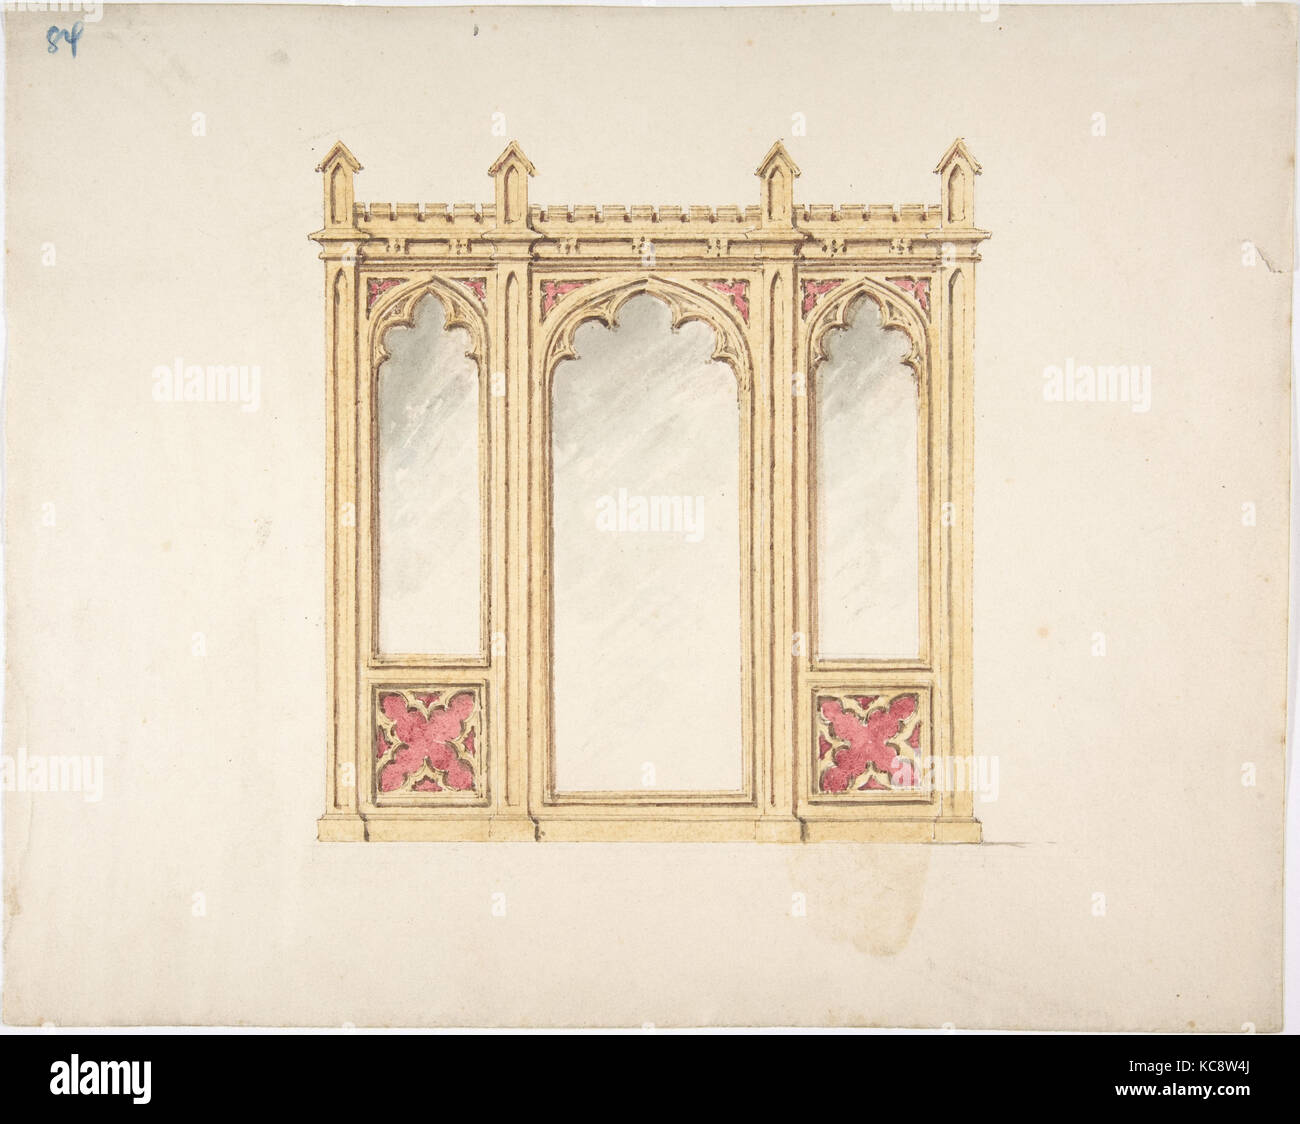 Design for Gothic Tracery and Paneling, Anonymous, British, 19th century, early 19th century Stock Photo